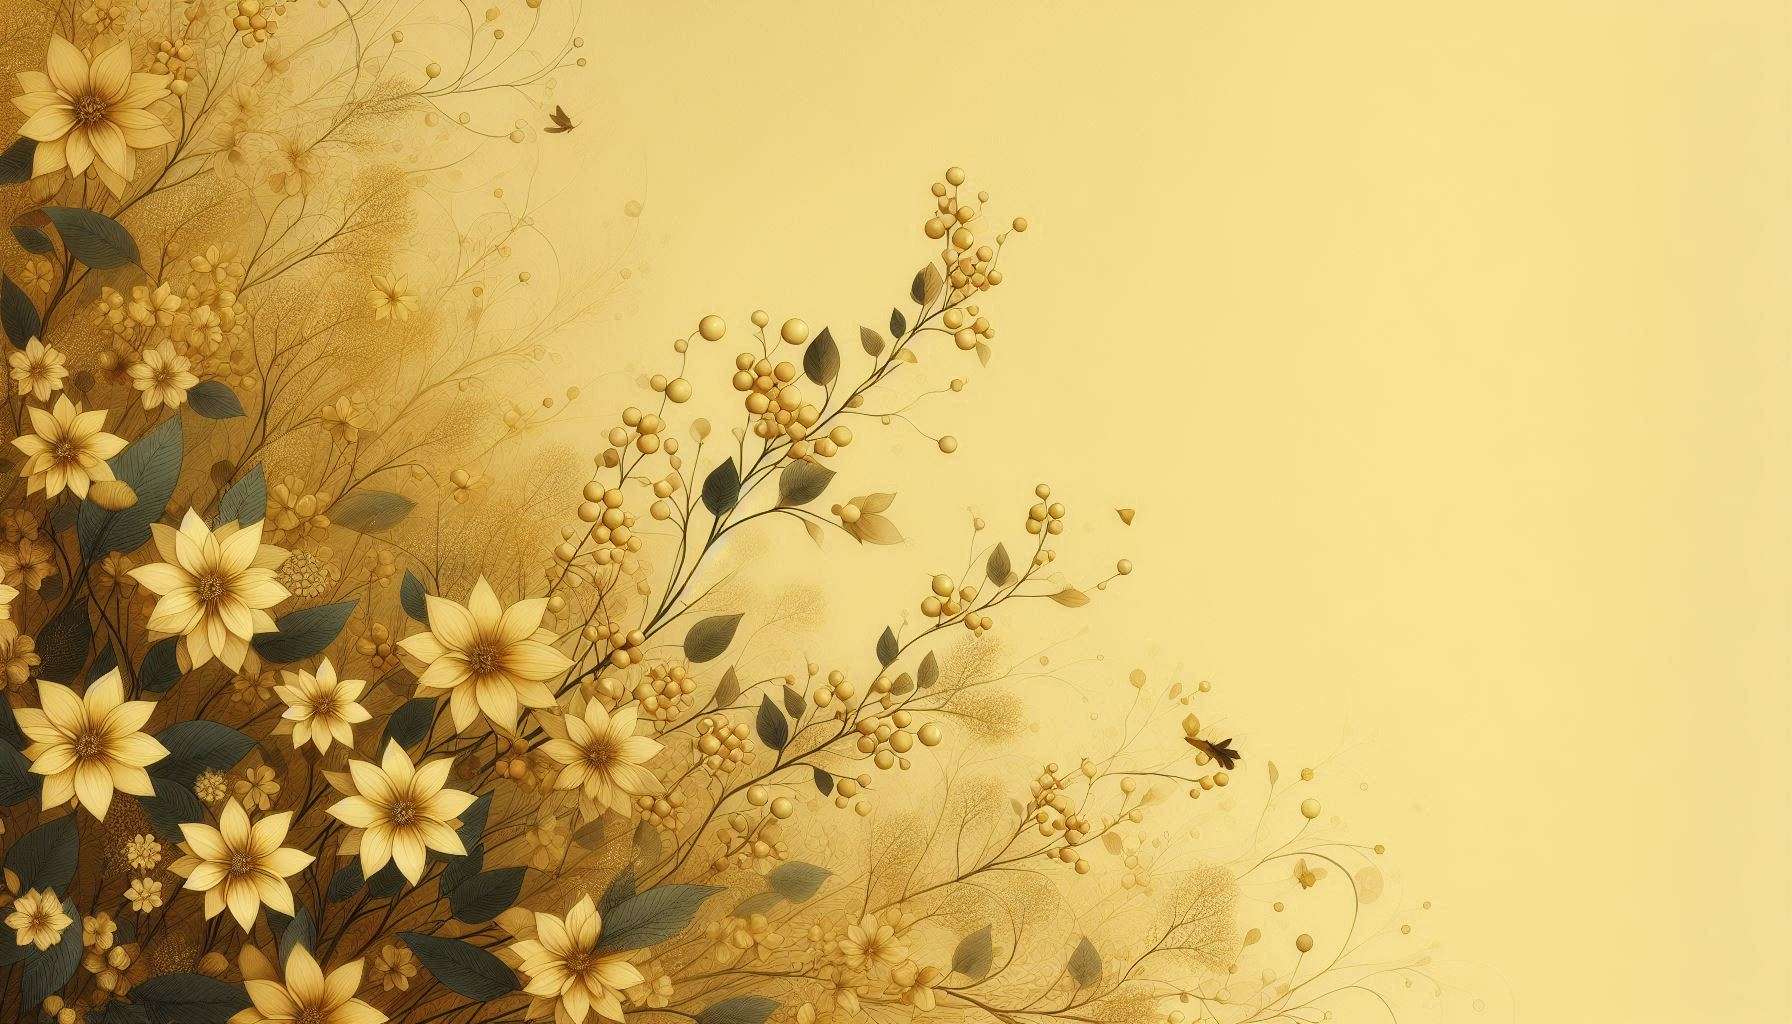 Download Free scenic light yellow background with flower for websites, slideshows, and designs | royalty-free and unlimited use.